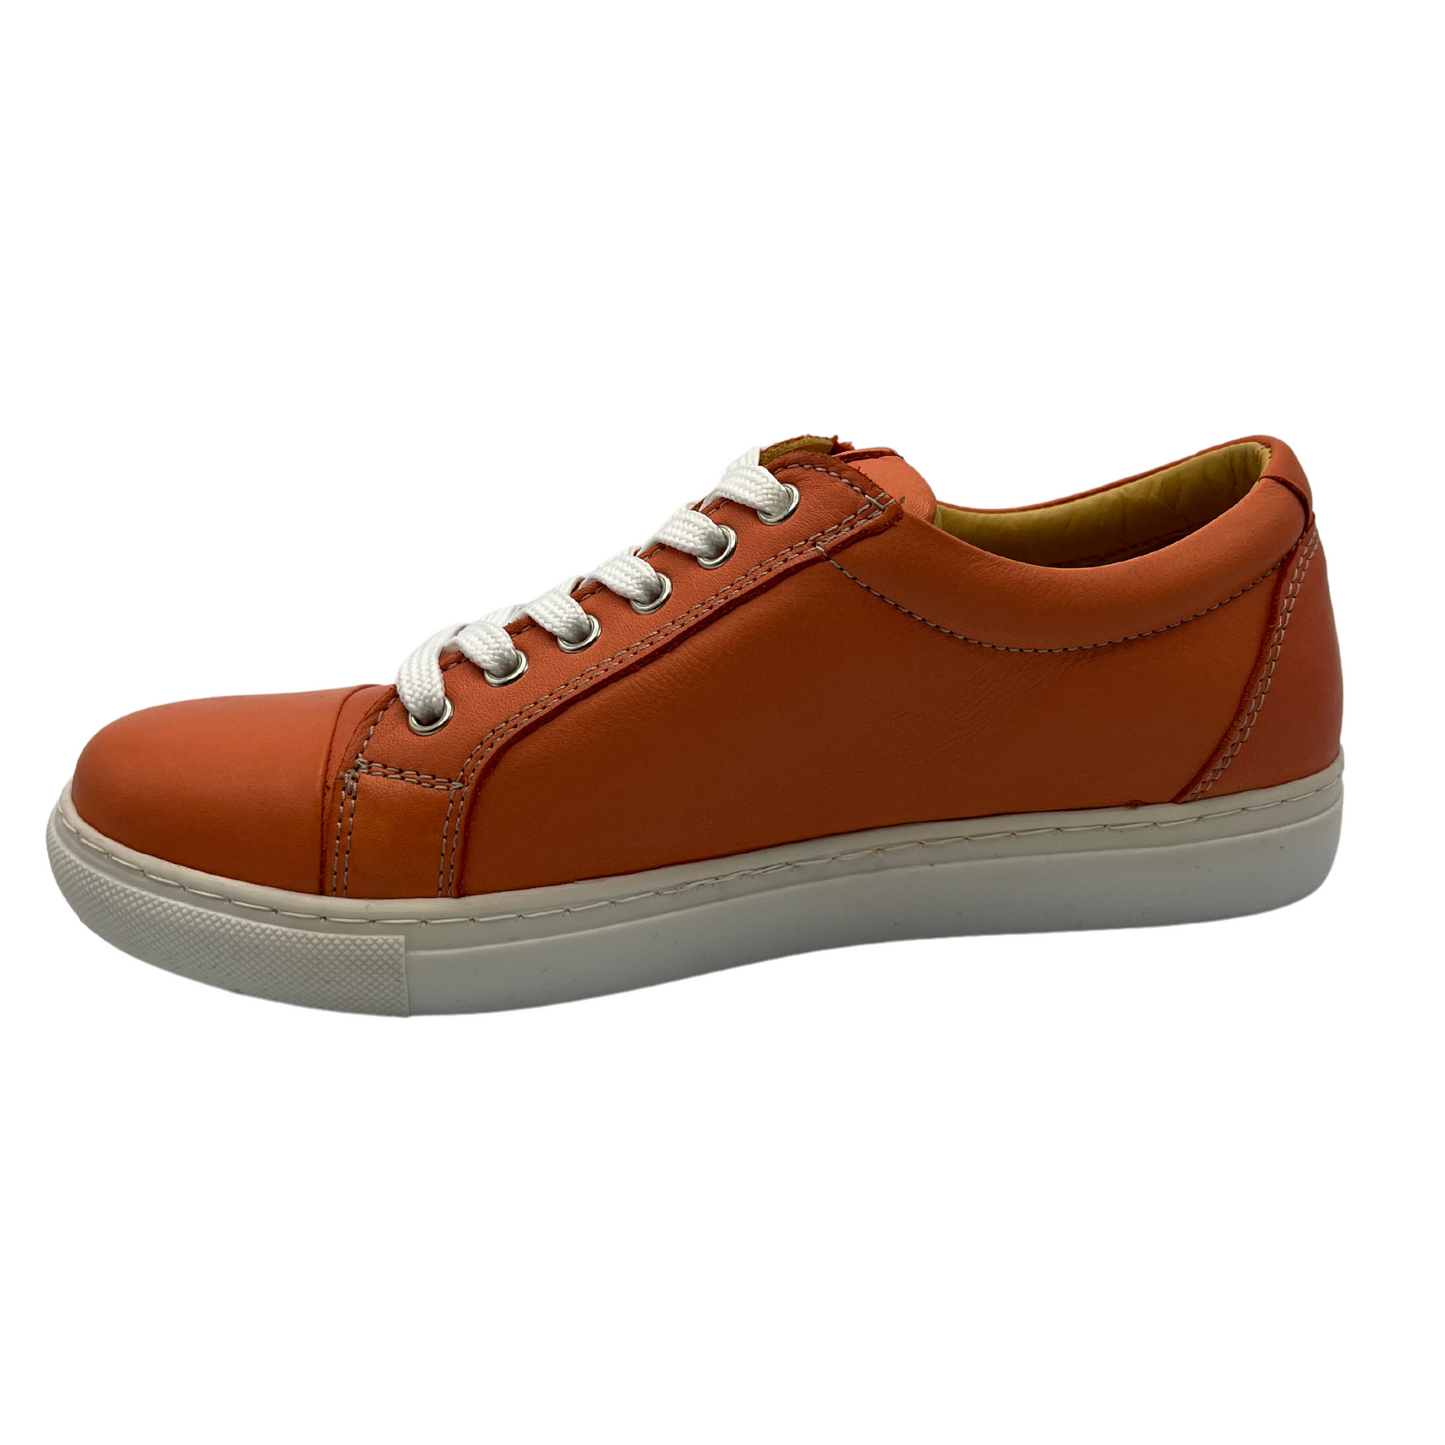 Left facing view of orange leather sneaker with white rubber outsole and white laces.